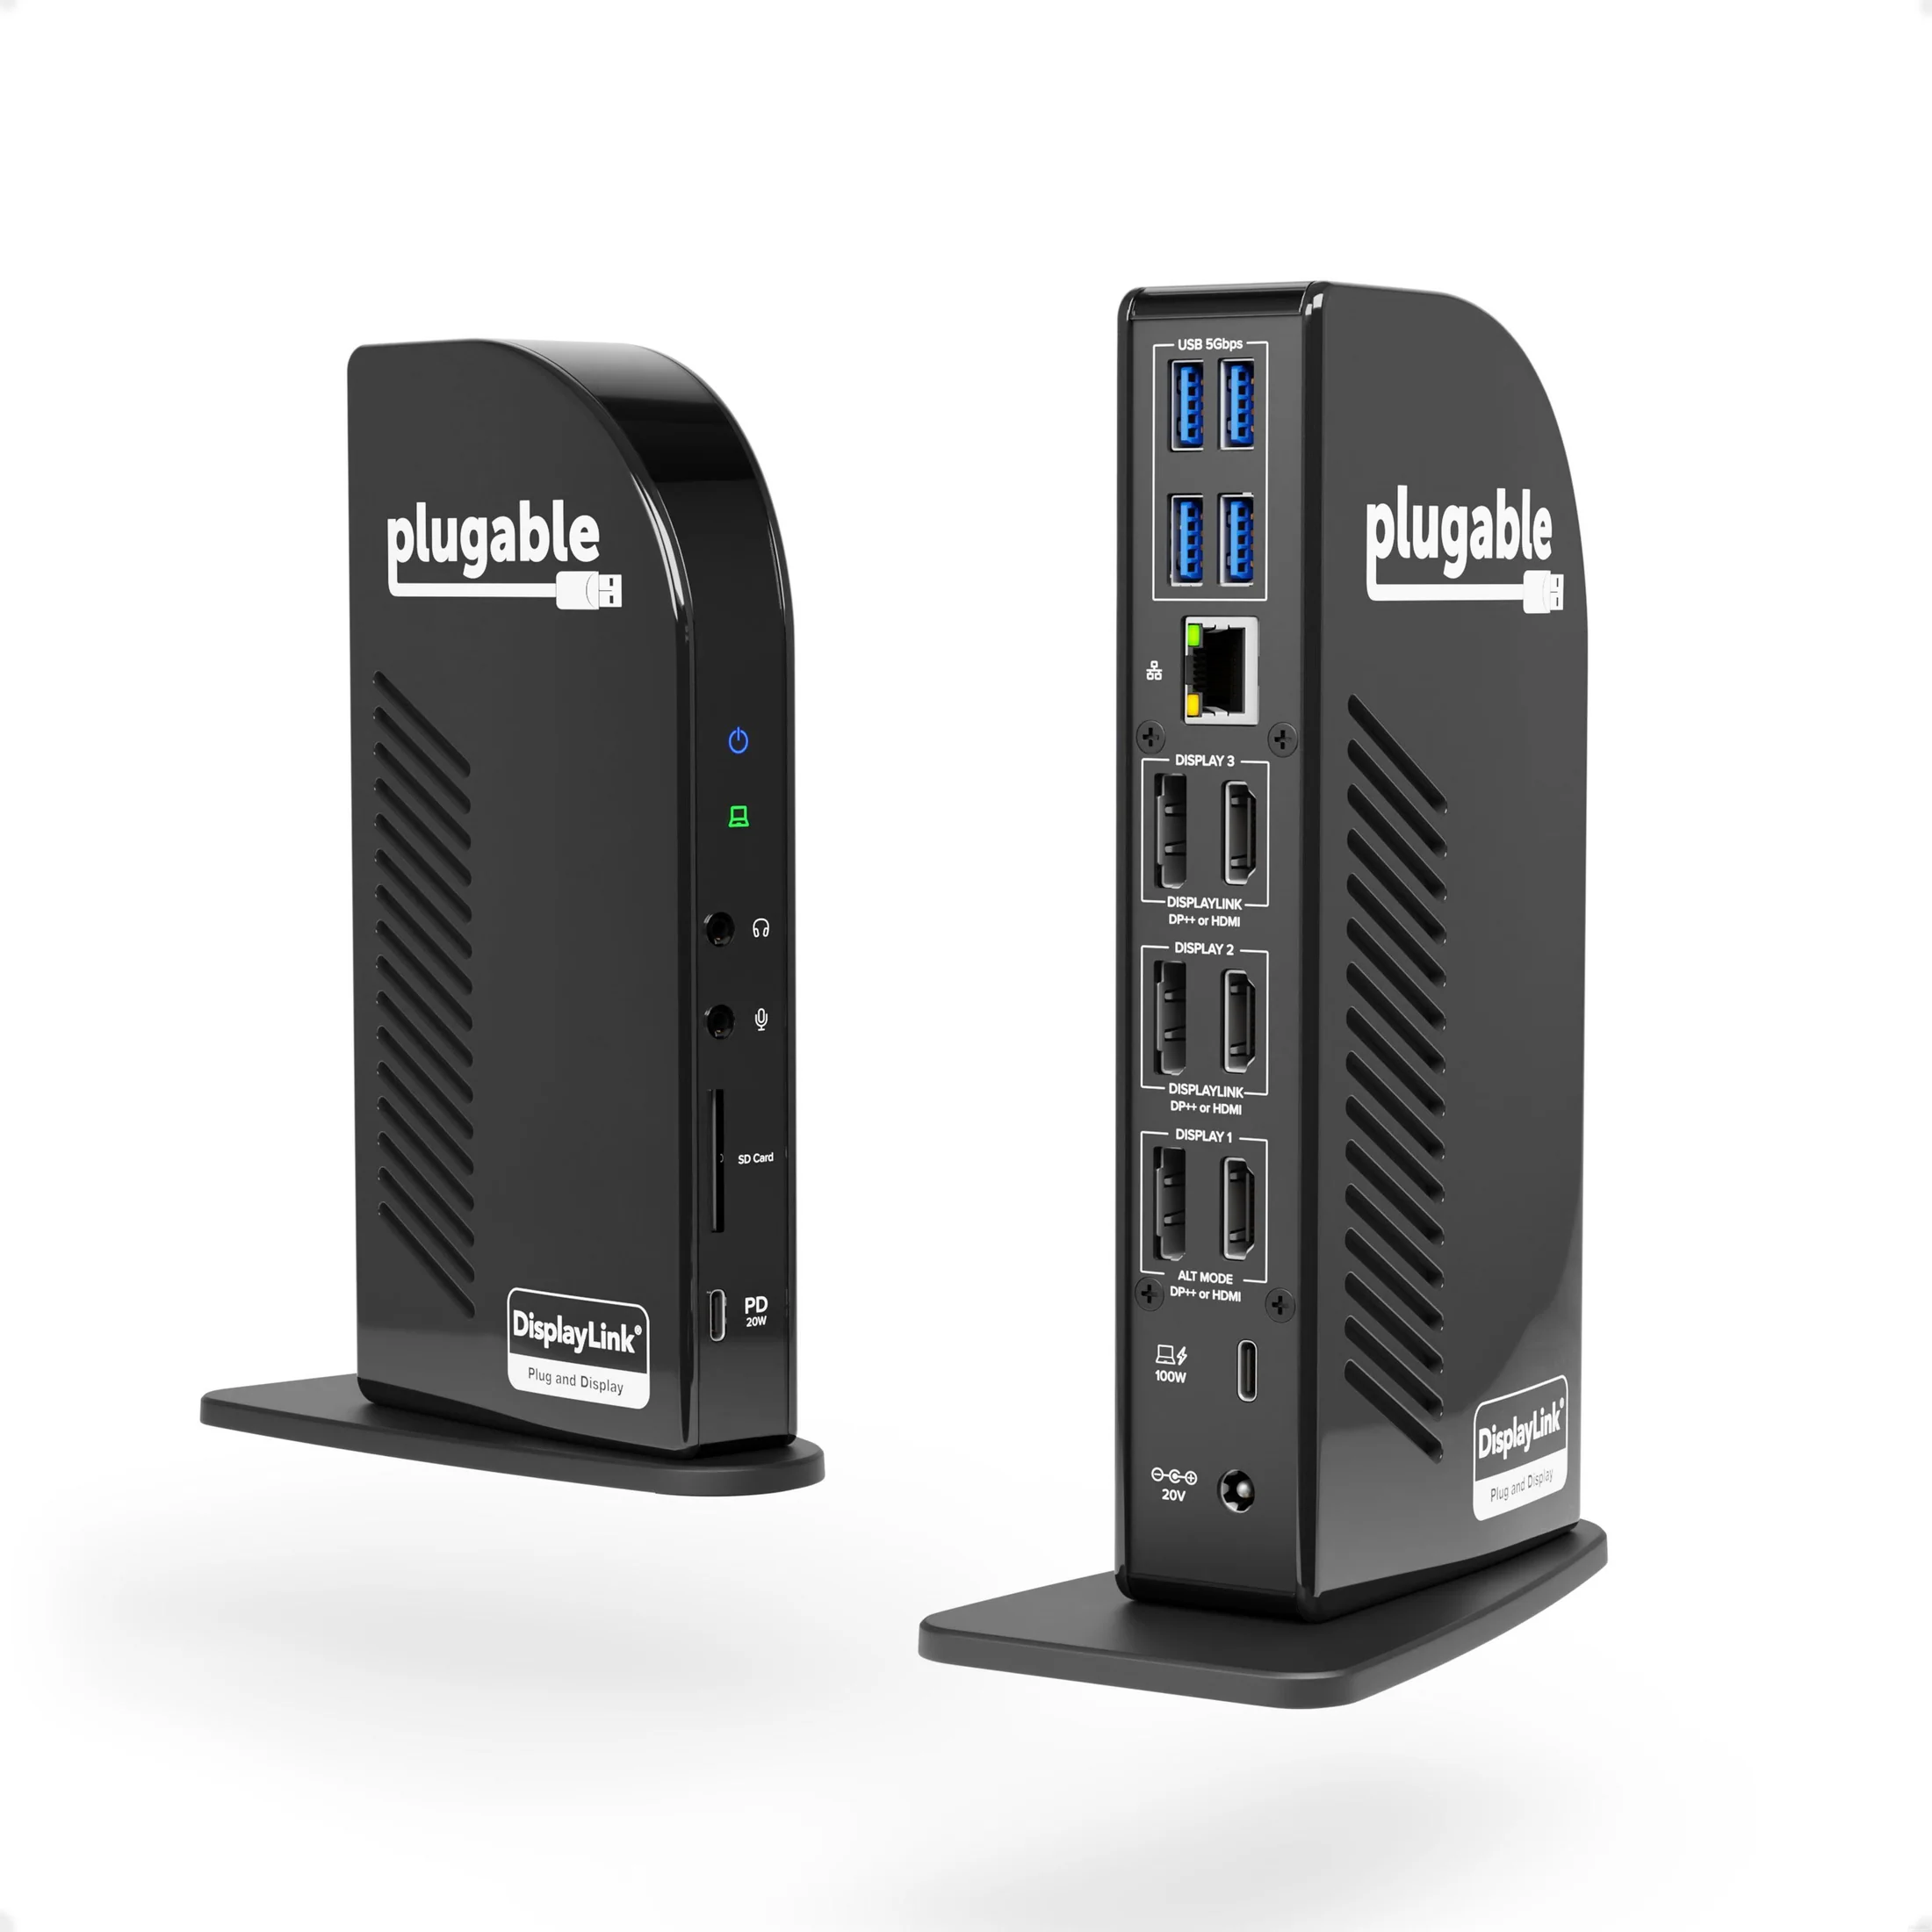 Image showing the front and back of the Plugable brand docking station.